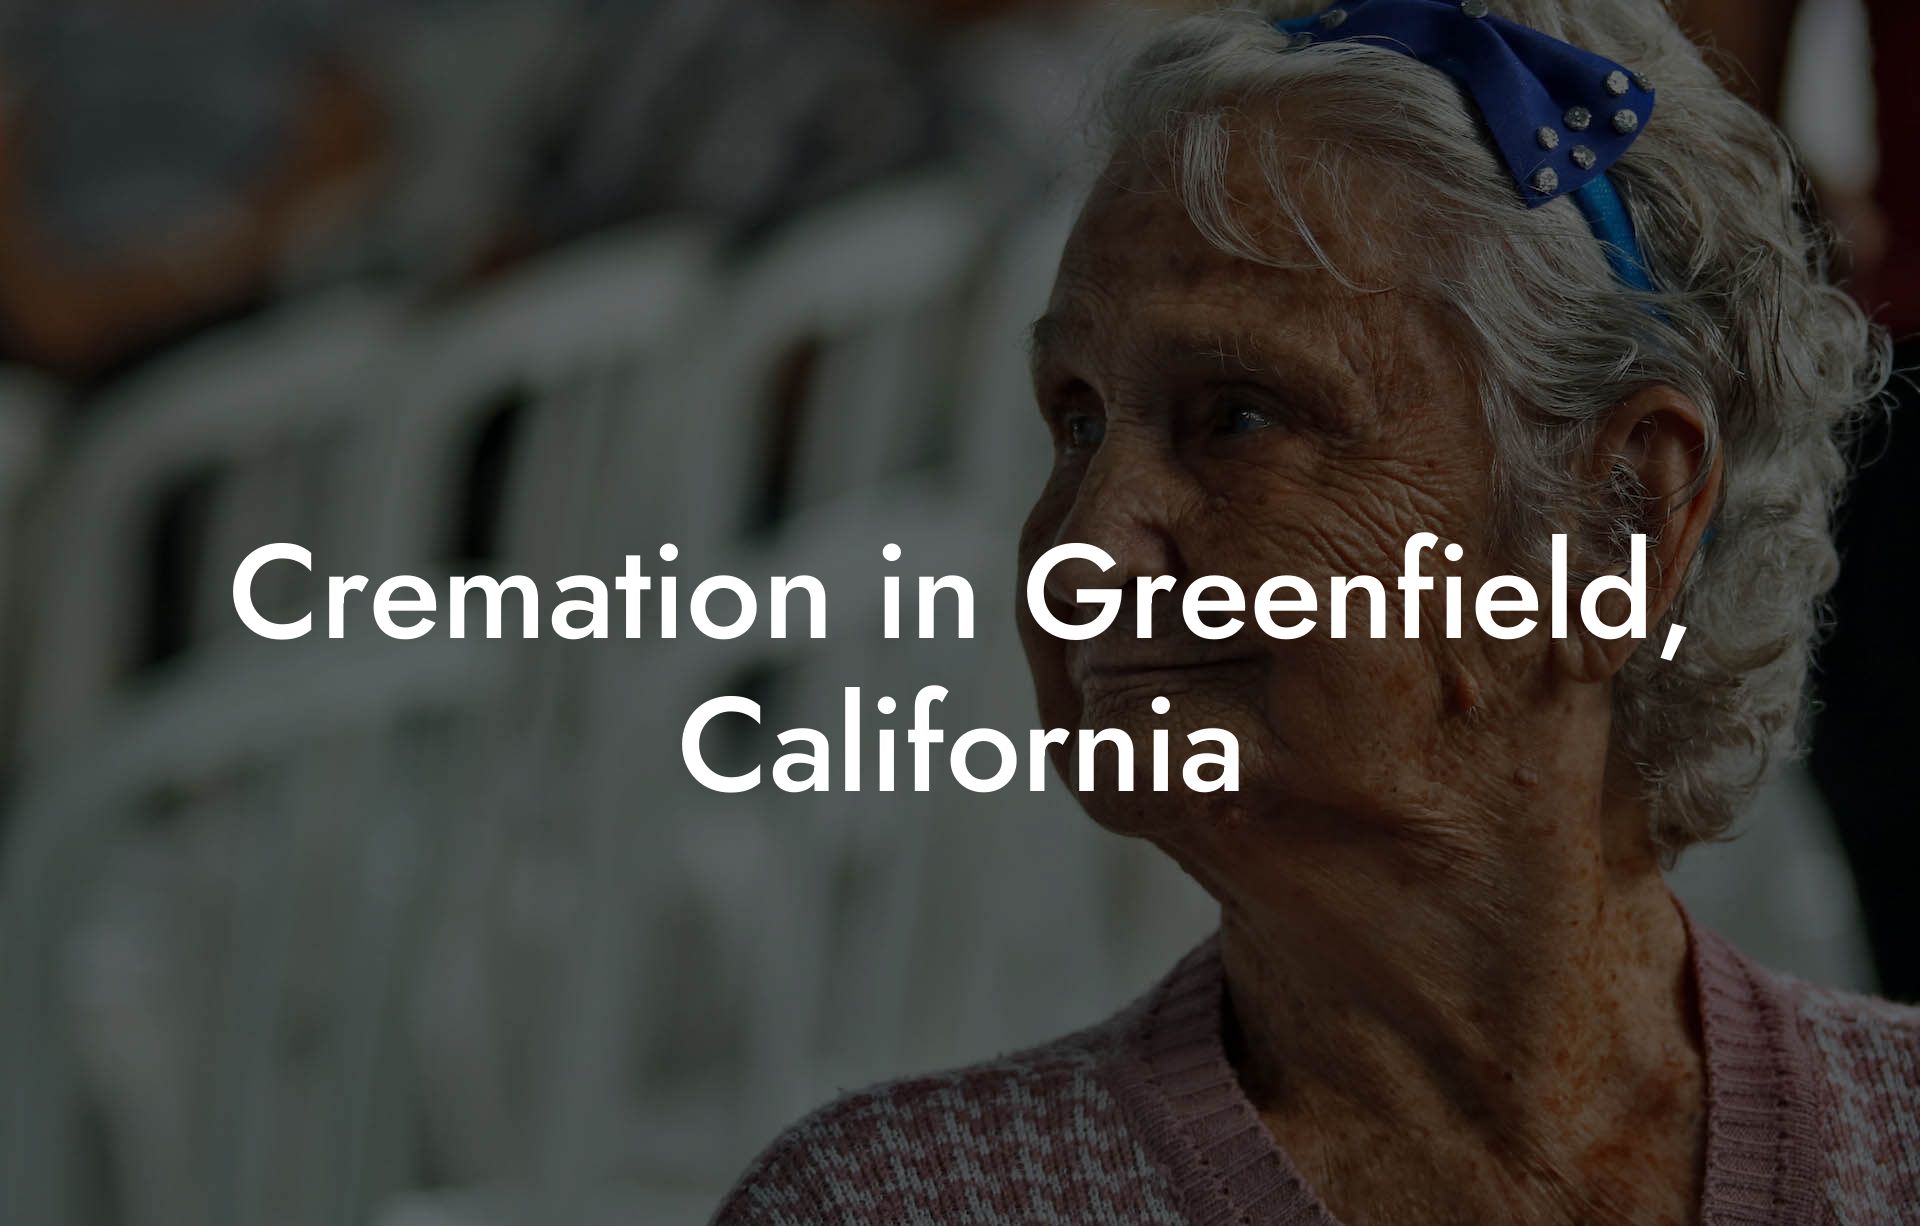 Cremation in Greenfield, California